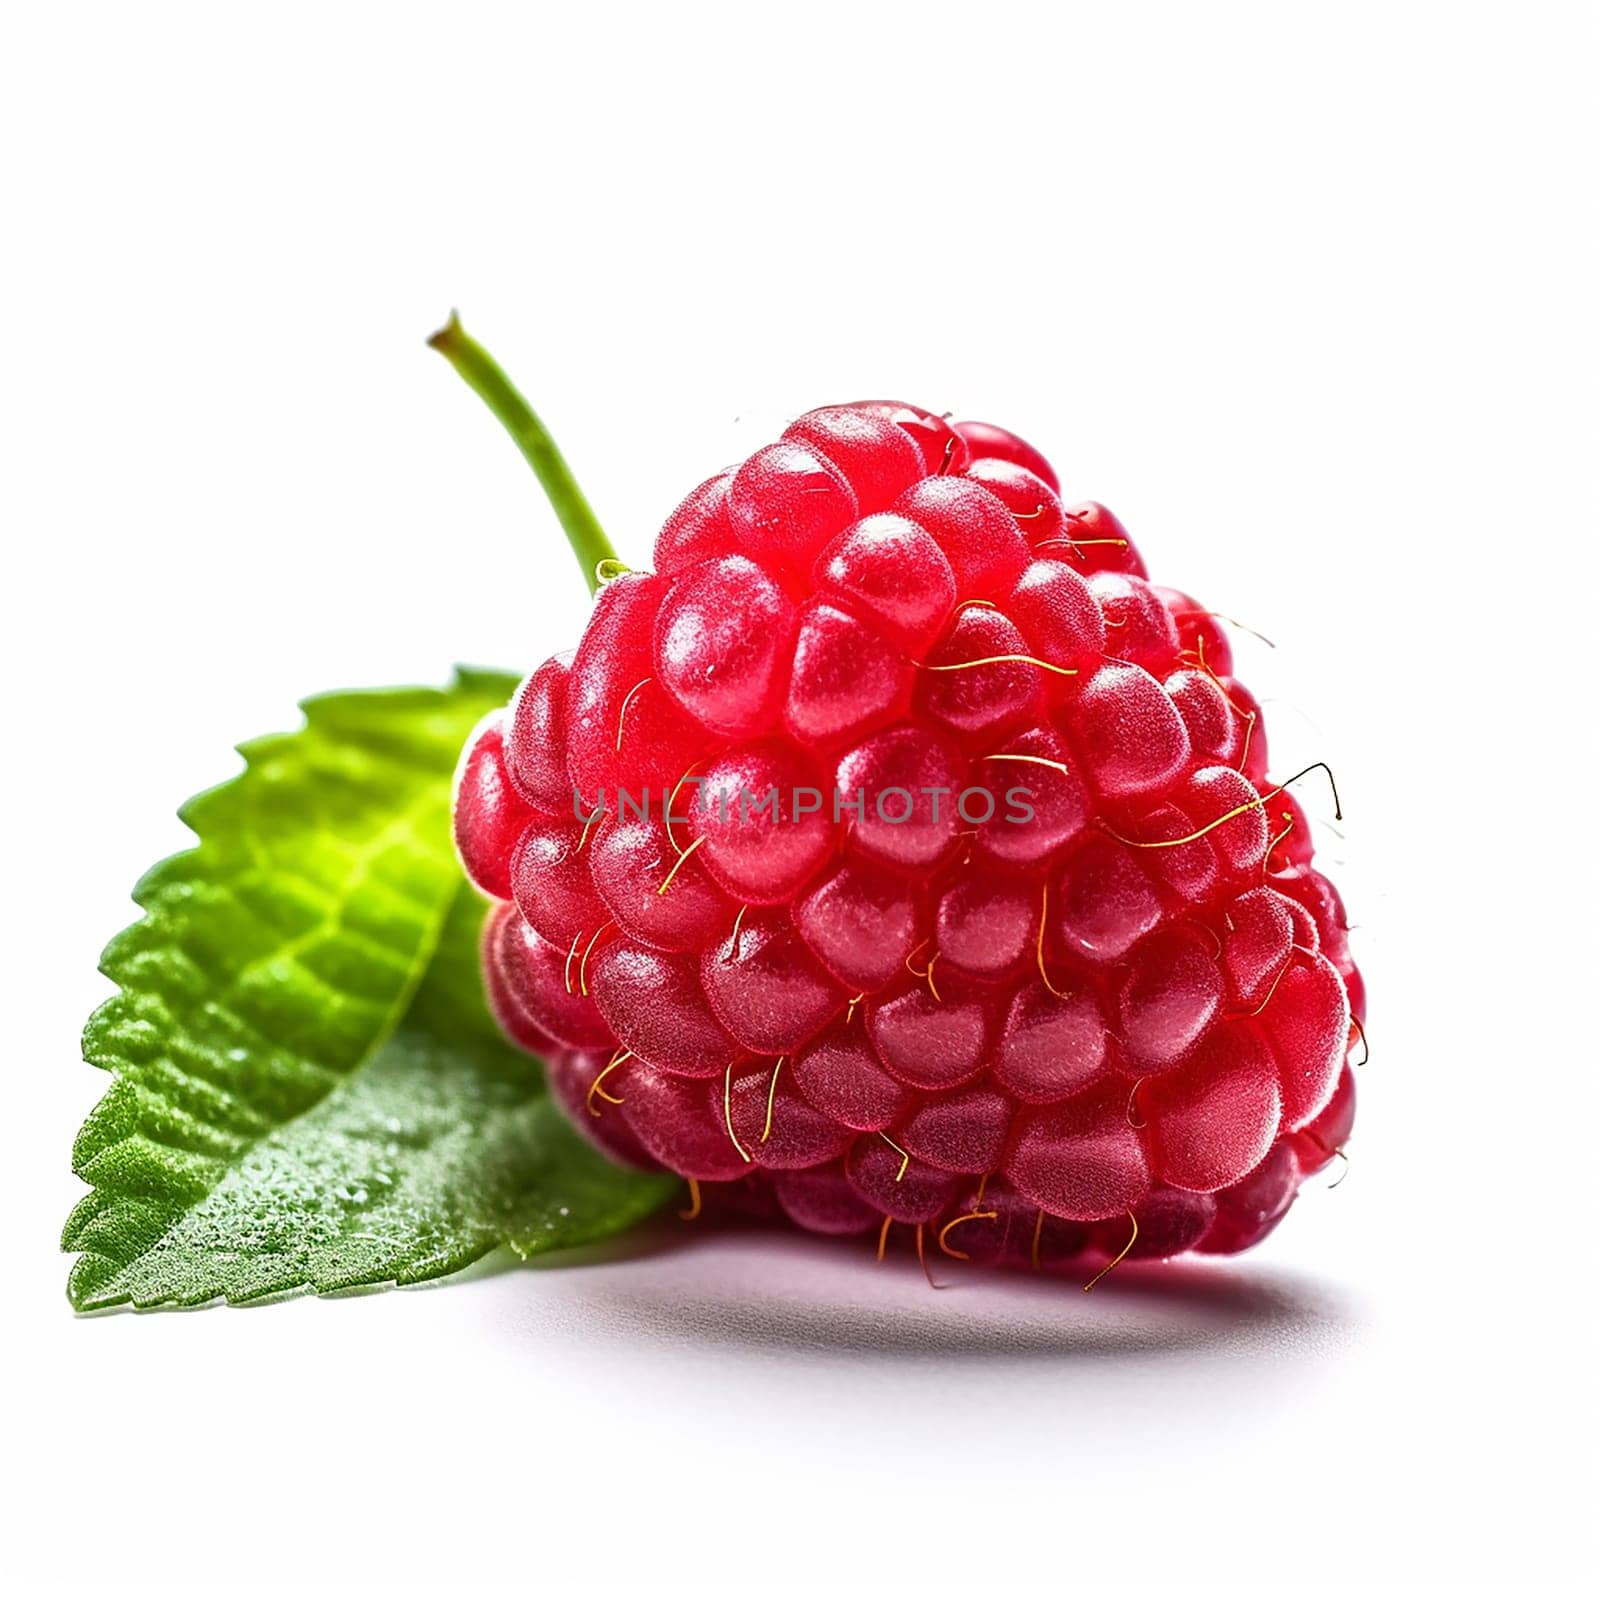 A single ripe raspberry with a green leaf on white background. by Hype2art